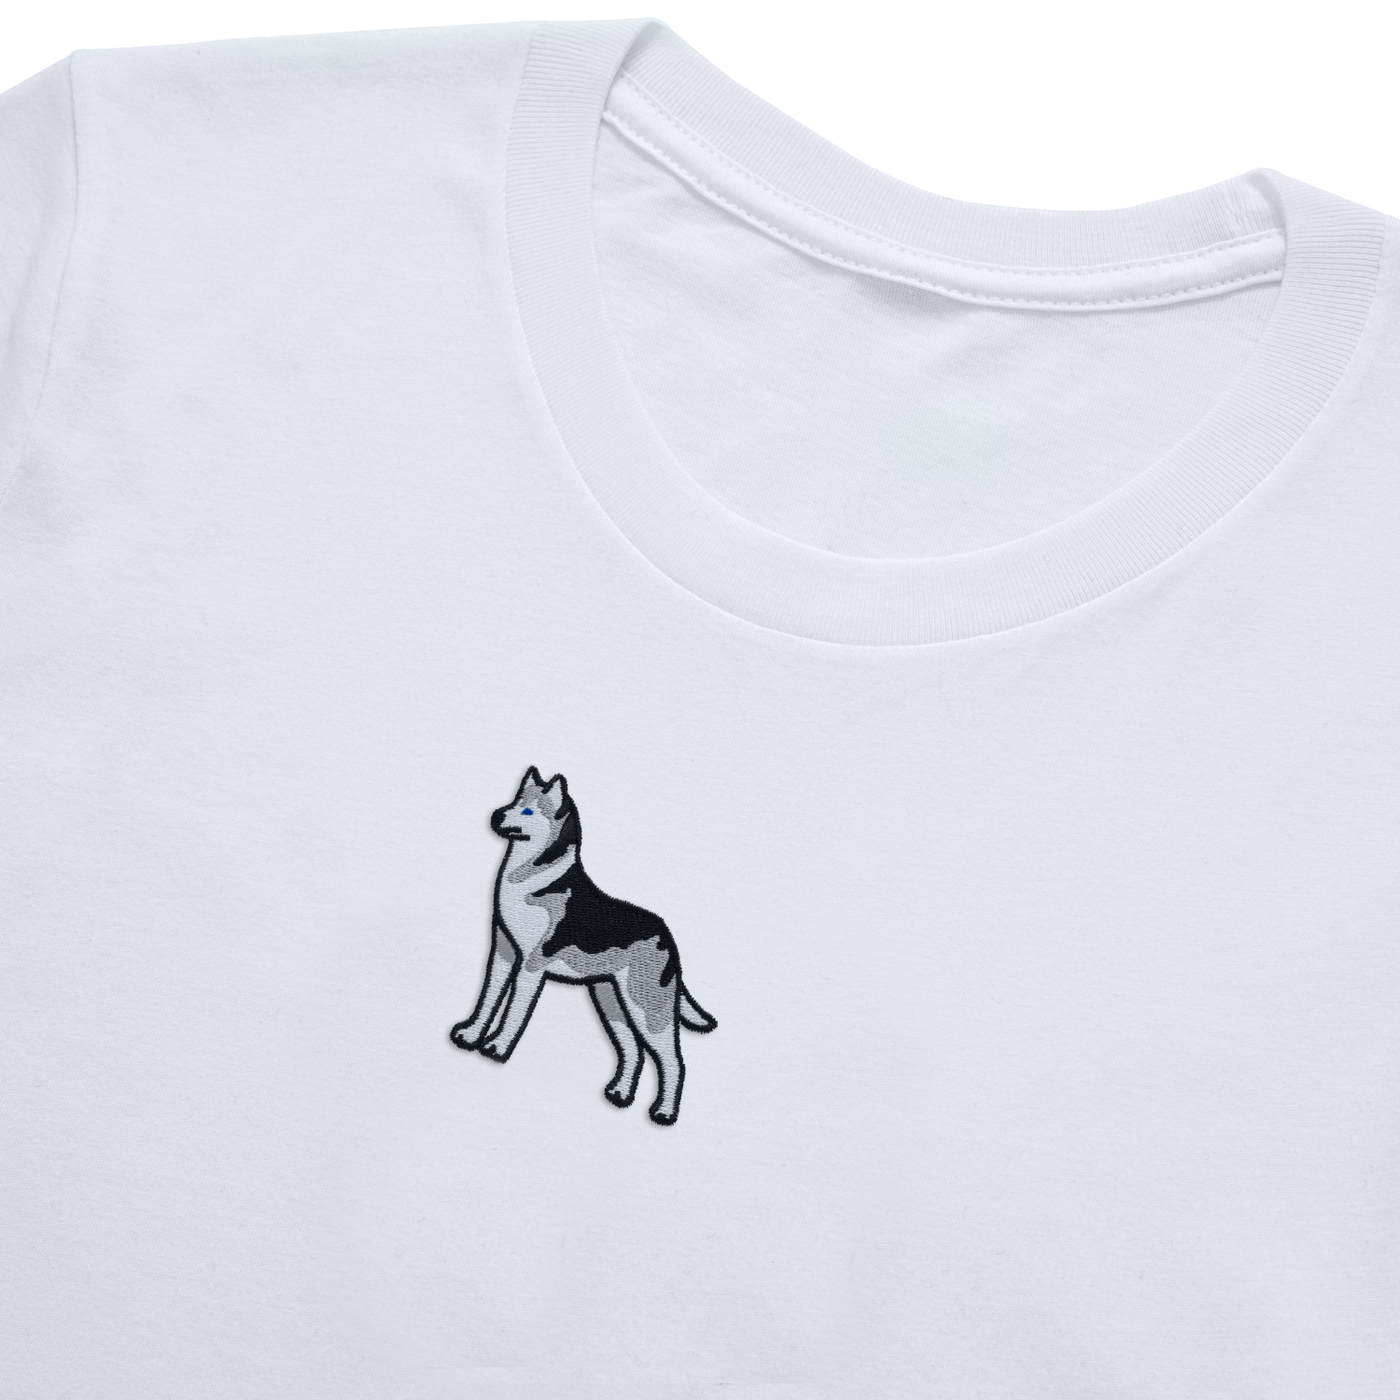 Bobby's Planet Men's Embroidered Siberian Husky T-Shirt from Paws Dog Cat Animals Collection in White Color#color_white